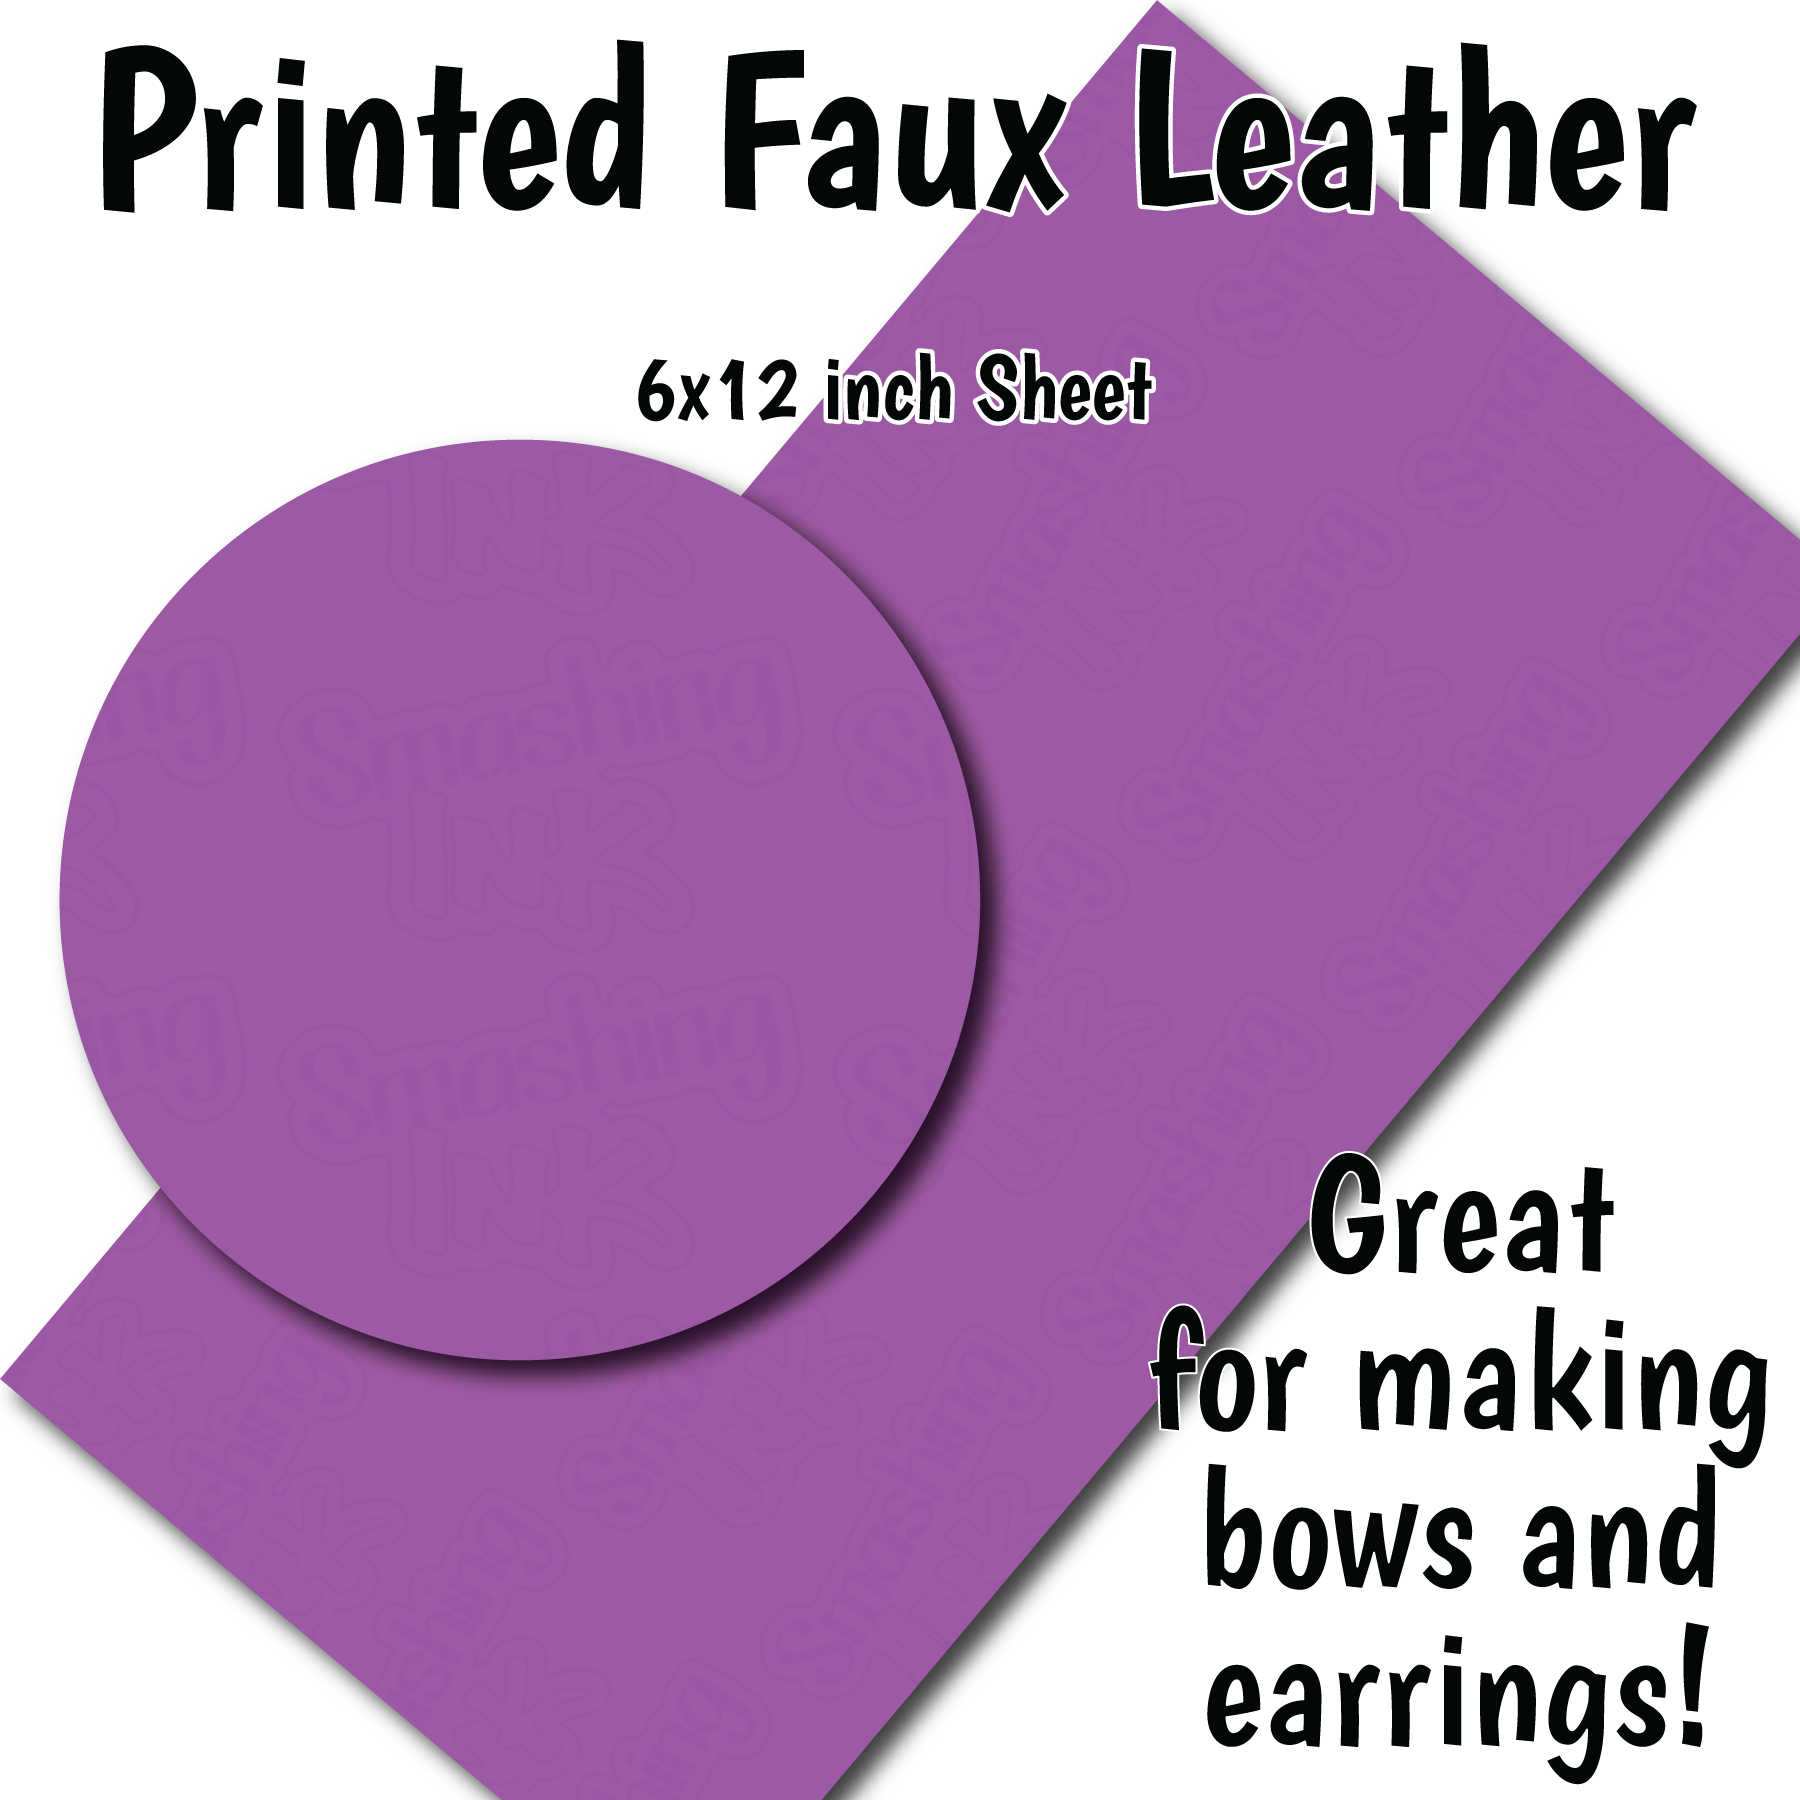 Laserable Leatherette Sheets 12x12 / Crafting Sheet Stock / Laser